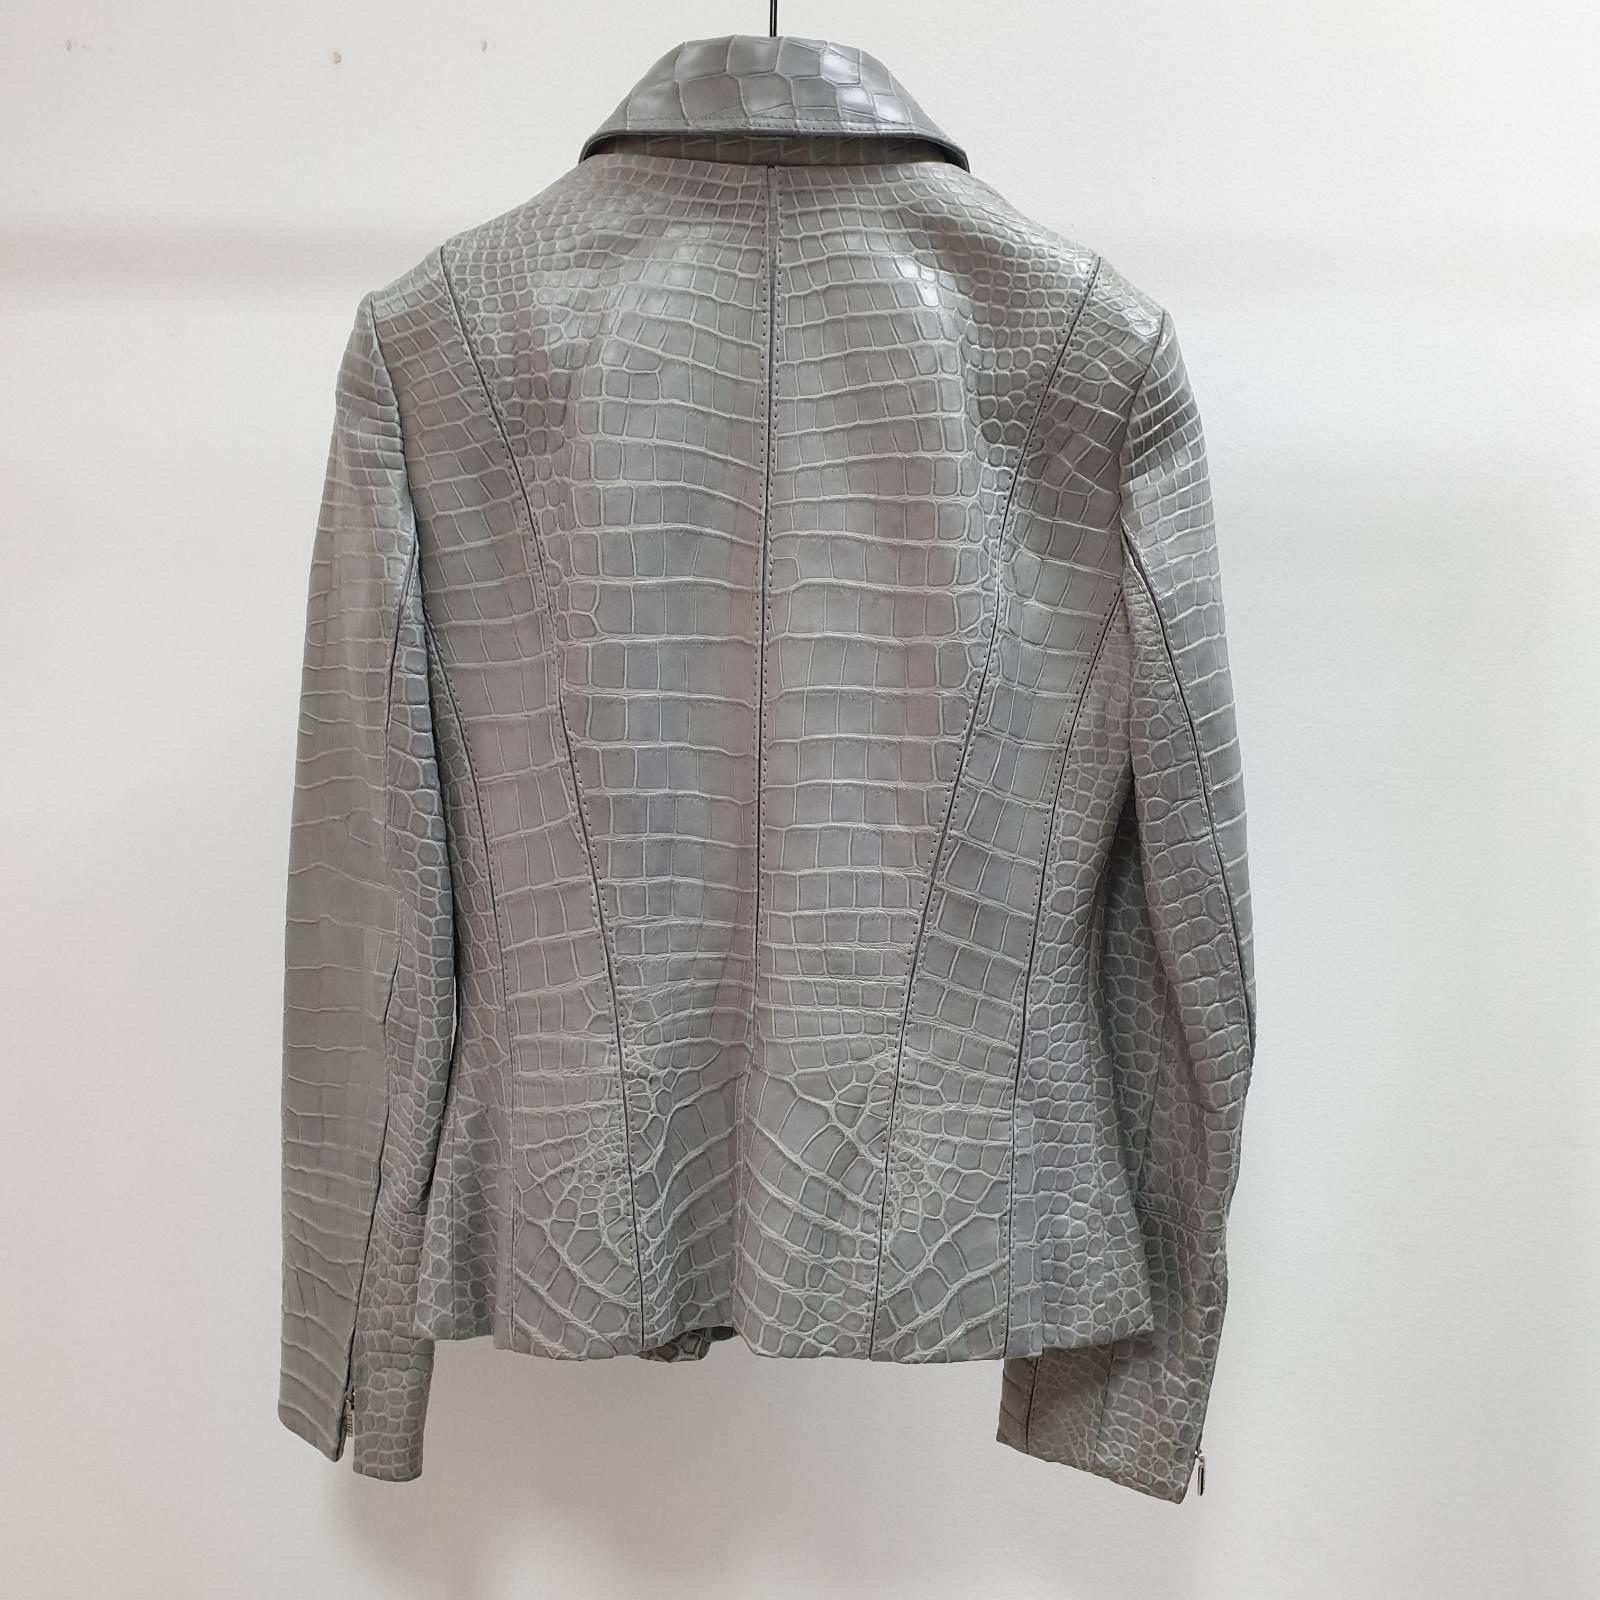 Zilly Gray Crocodile Leather Jacket In Good Condition For Sale In Krakow, PL